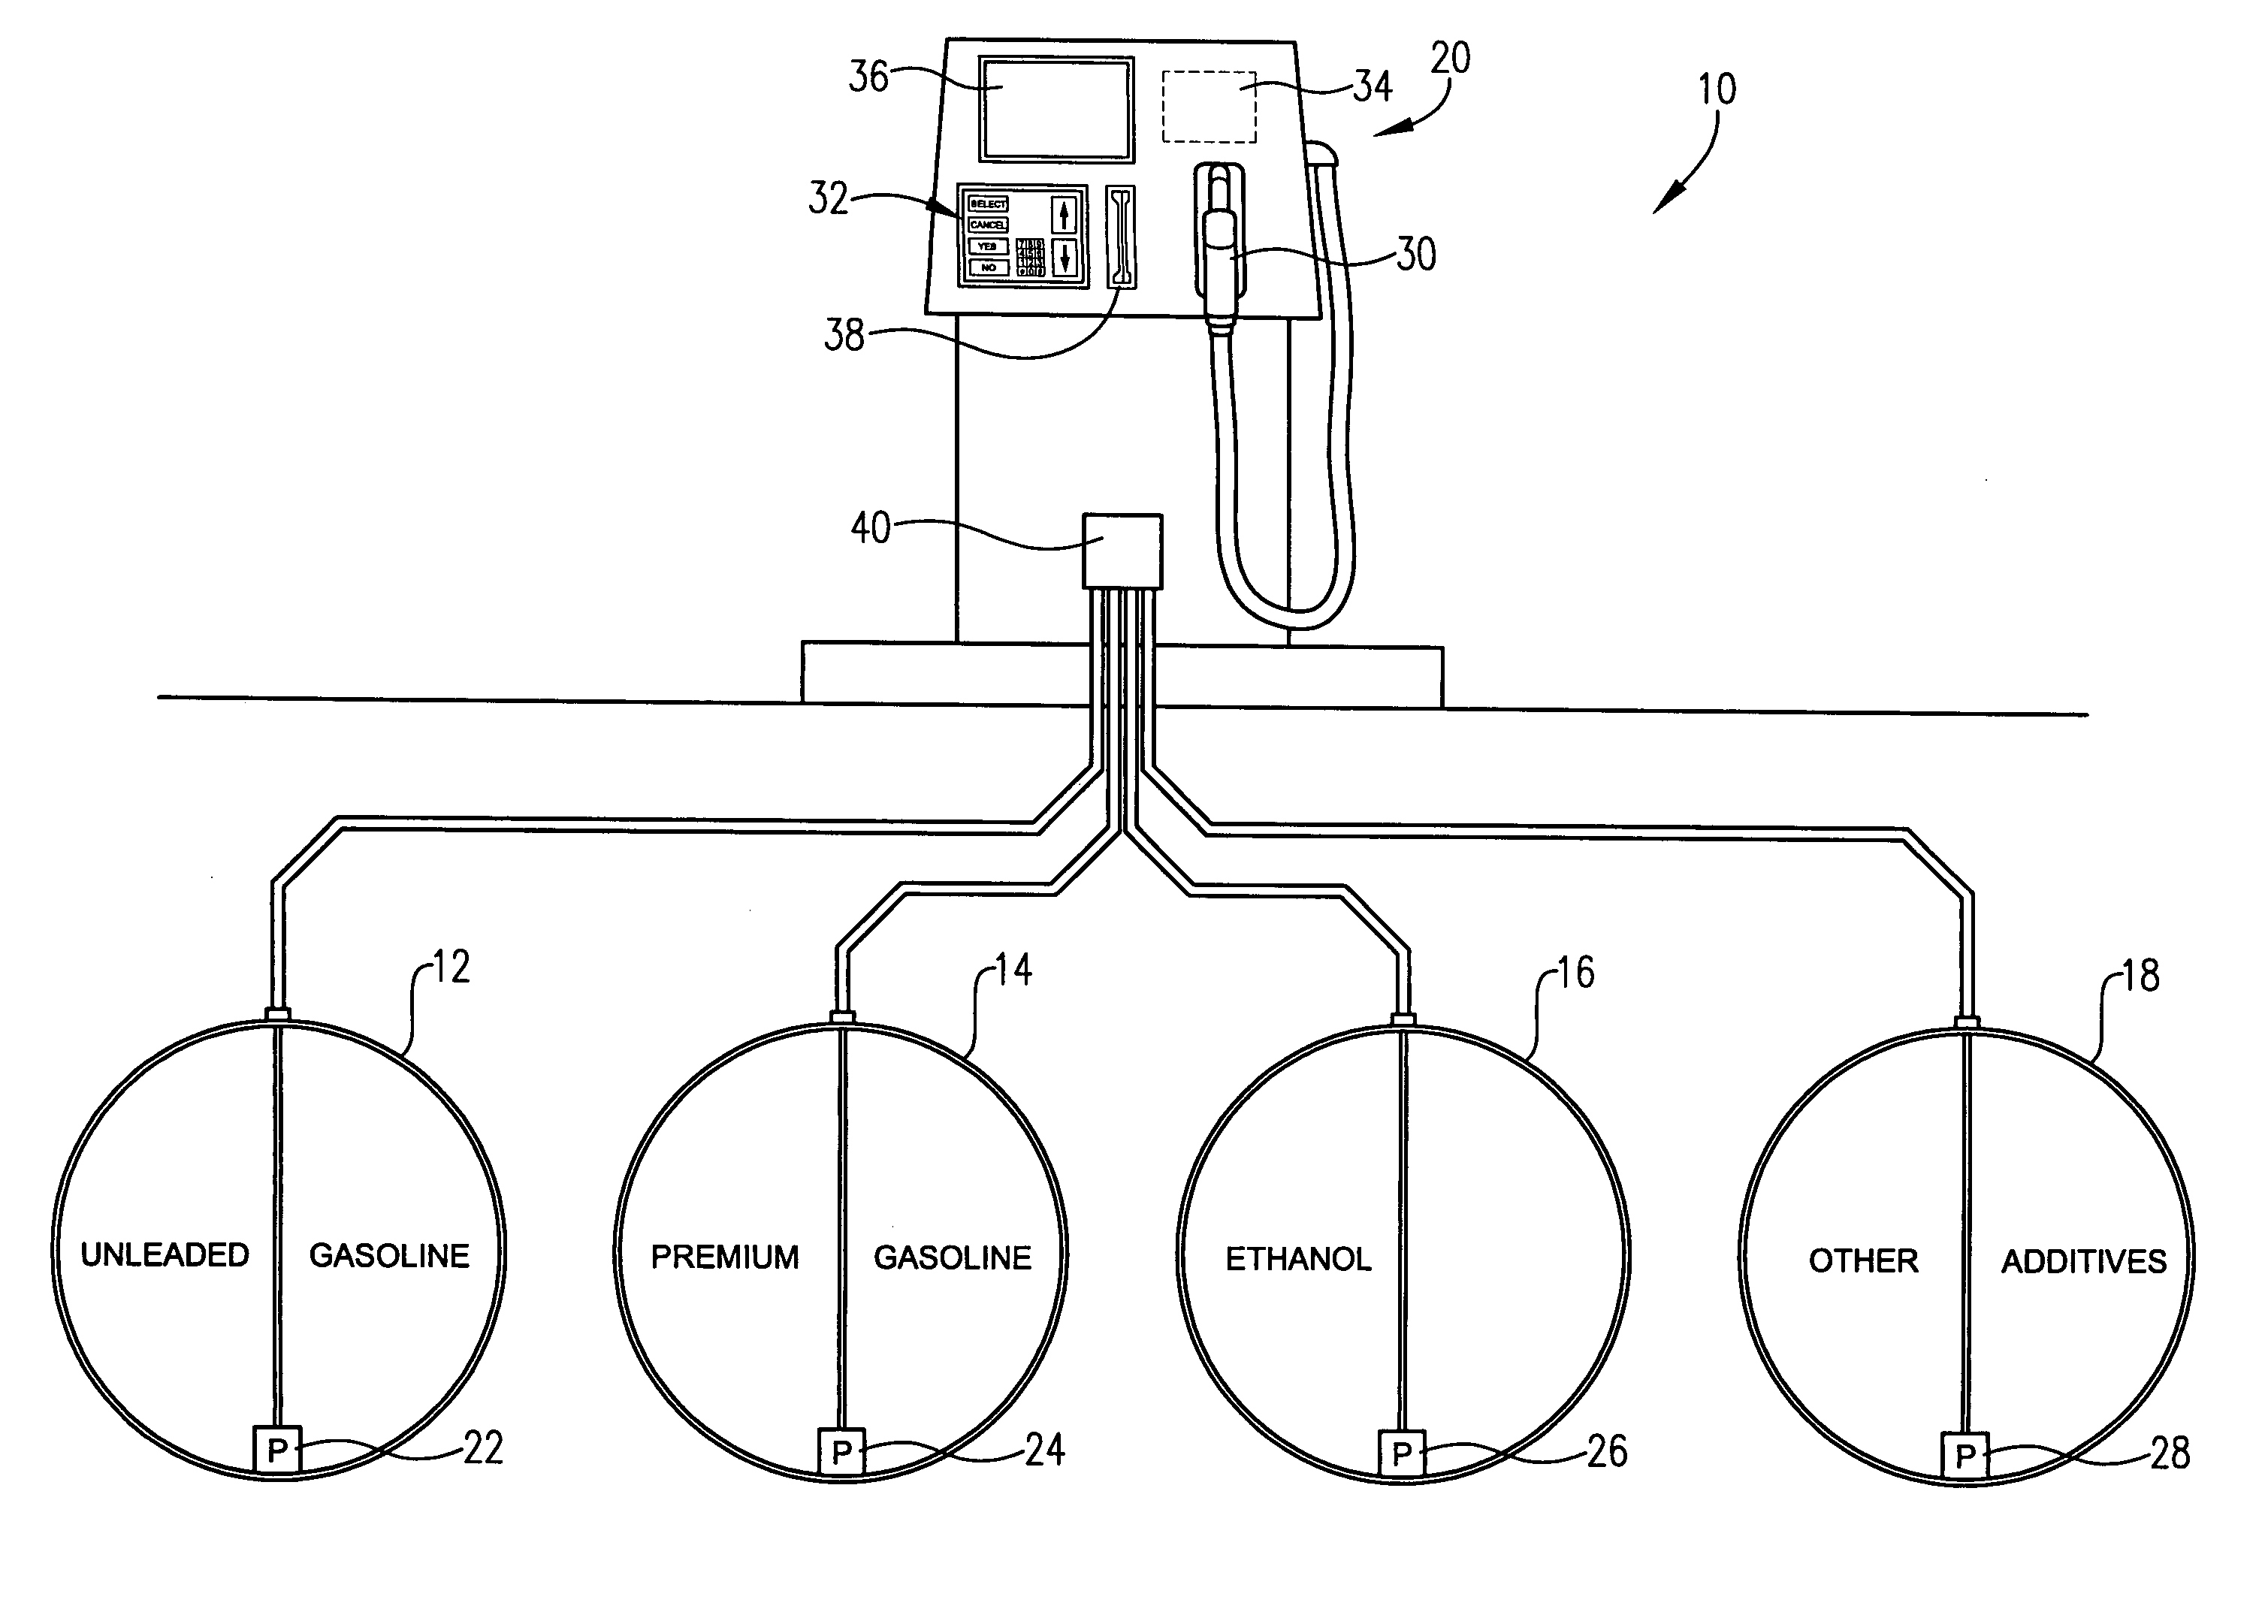 Method and system for blending and dispensing fuels